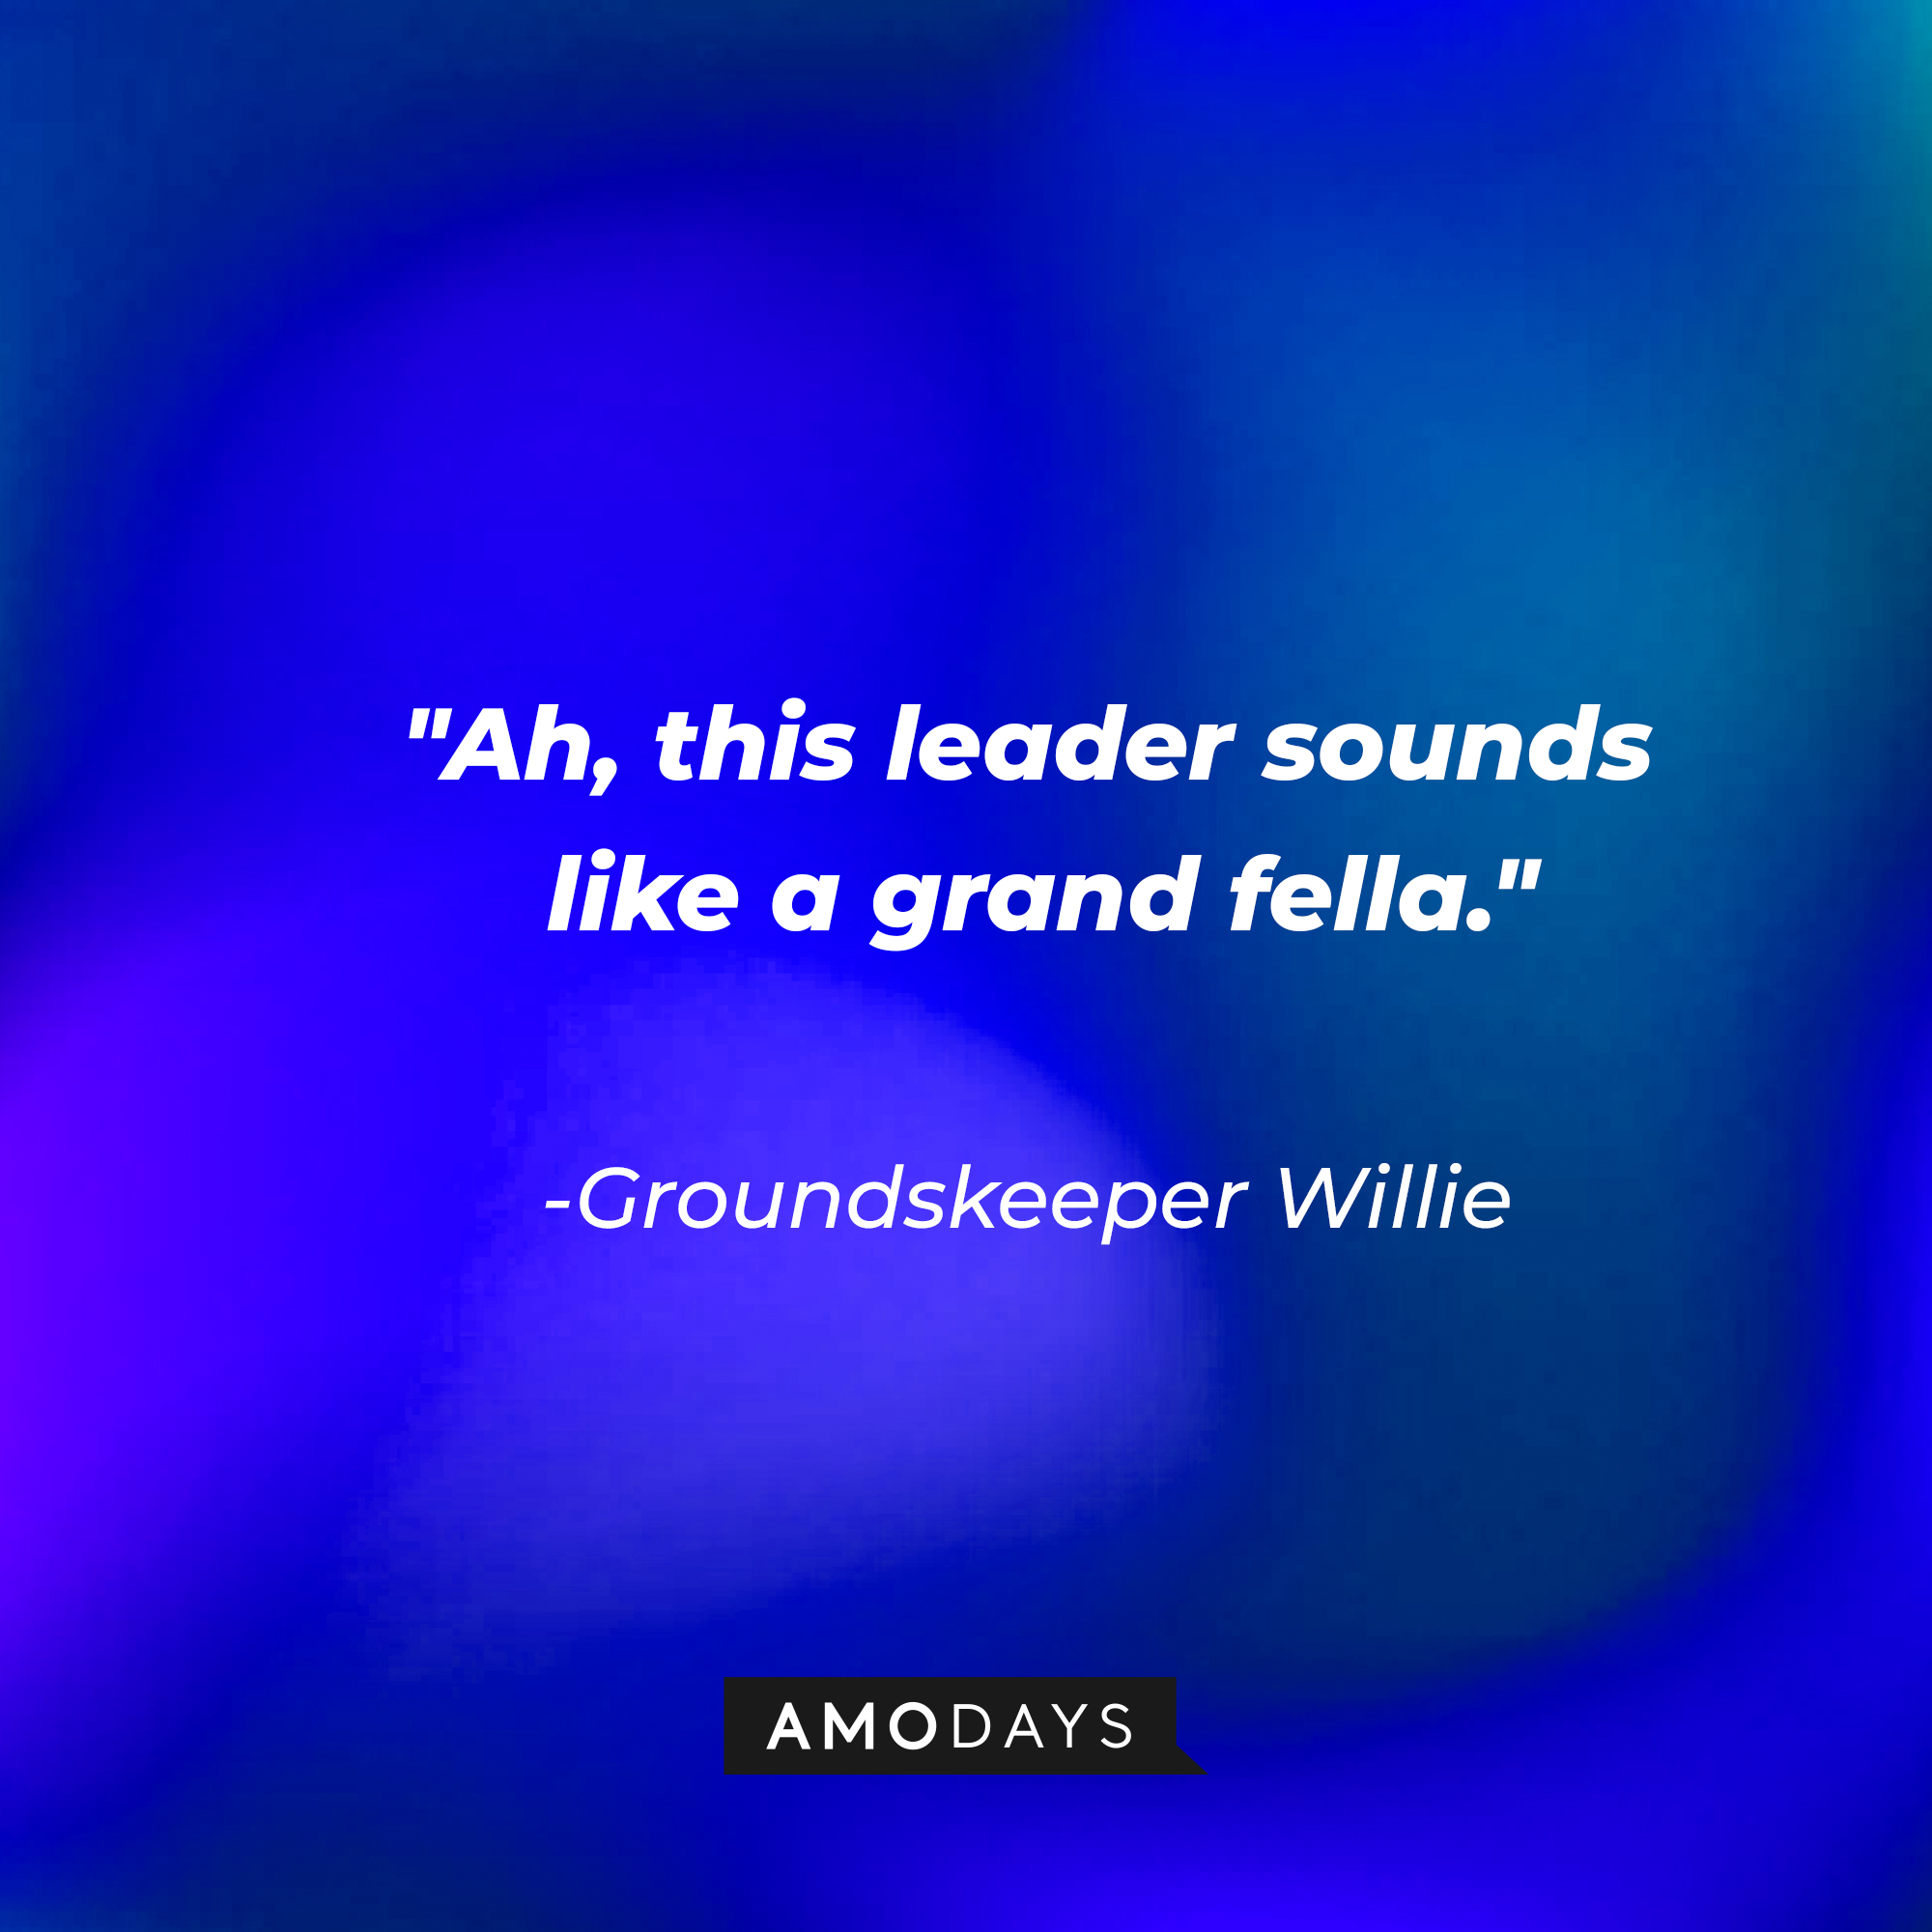 Groundskeeper Willie's quote: "Ah, this leader sounds like a grand fella." | Source: AmoDays